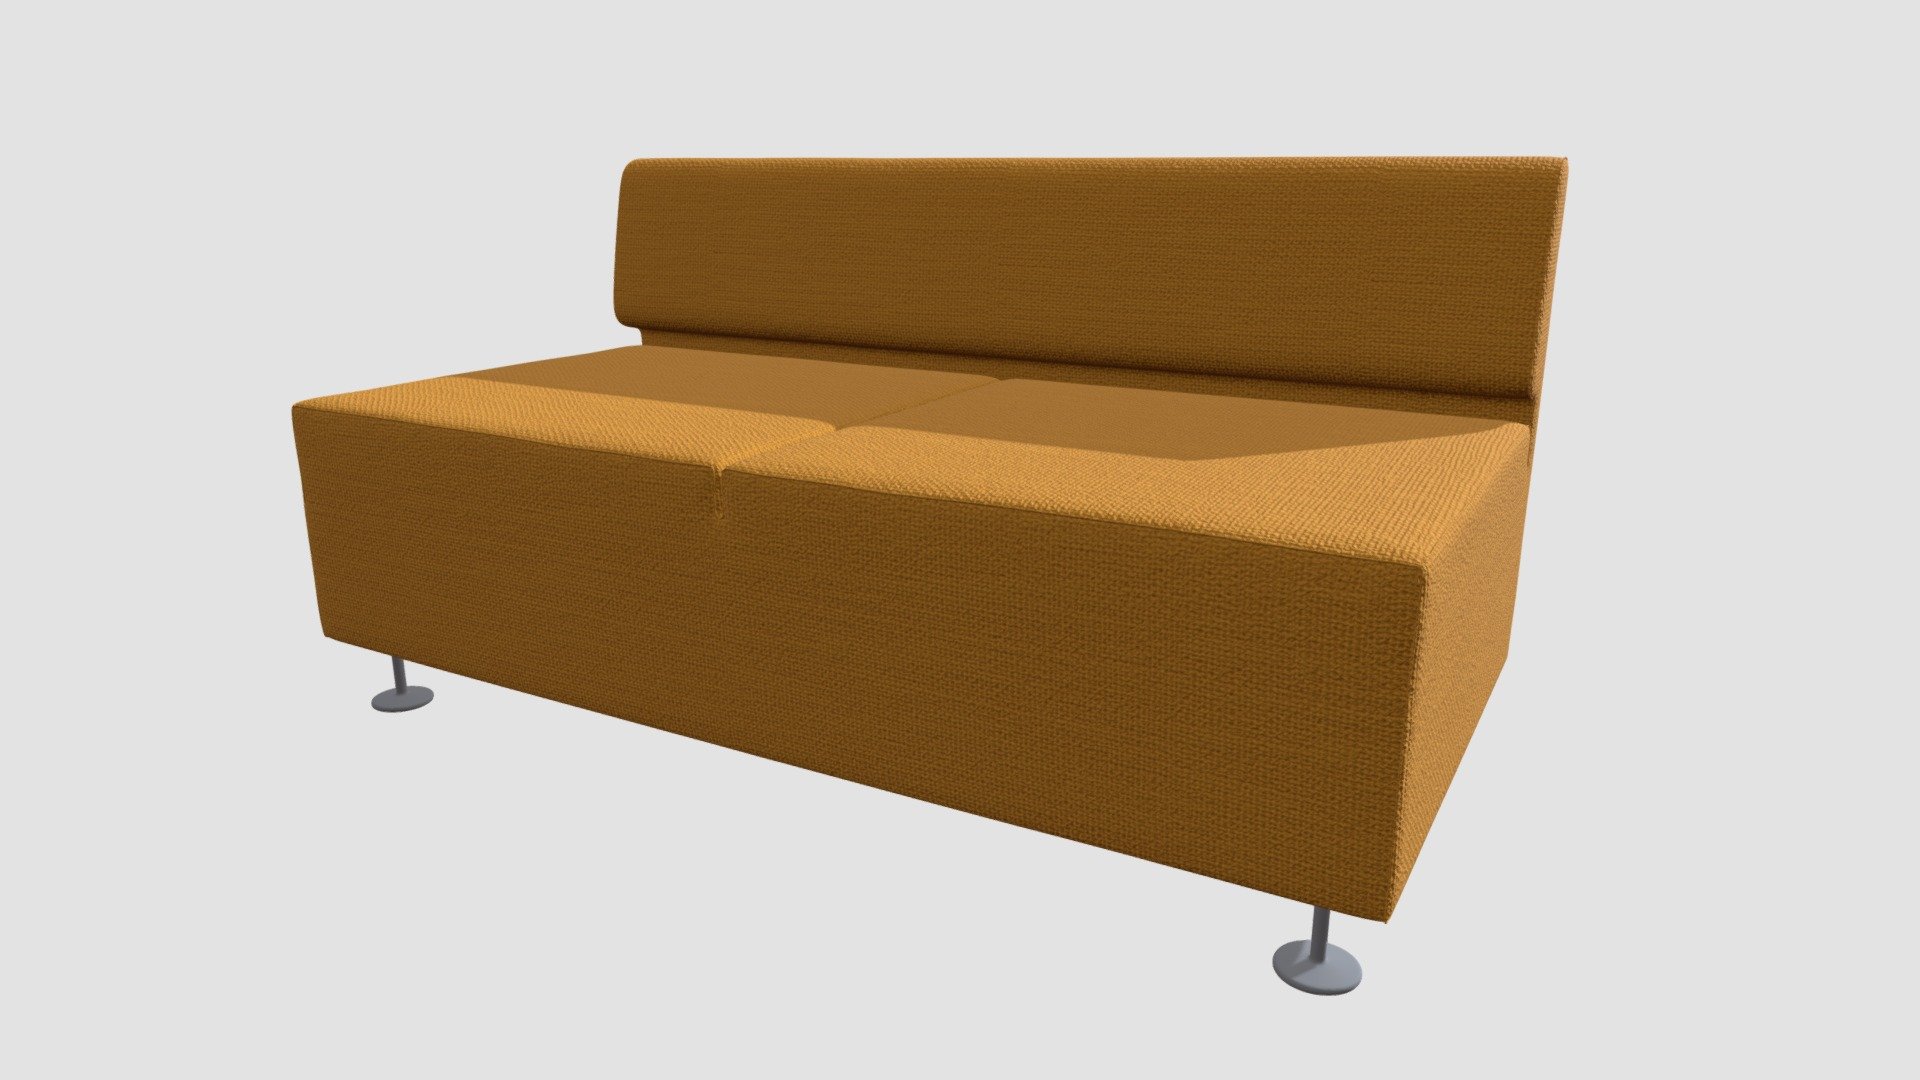 Highly detailed 3d model of sofa with all textures, shaders and materials. It is ready to use, just put it into your scene 3d model